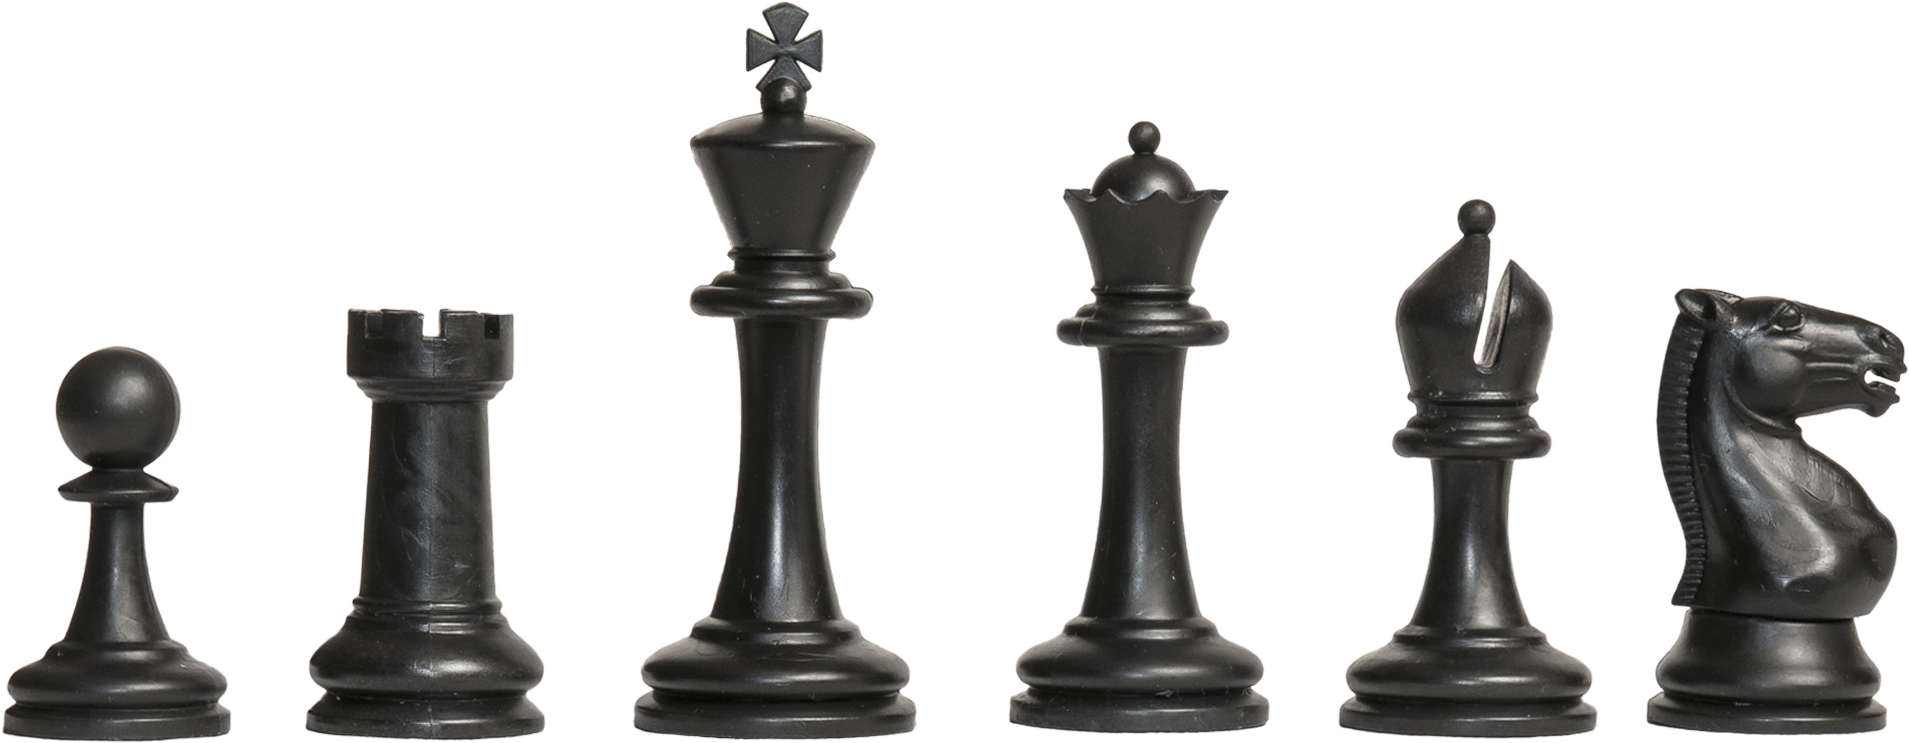 Chess Pieces Download Free Image PNG Image